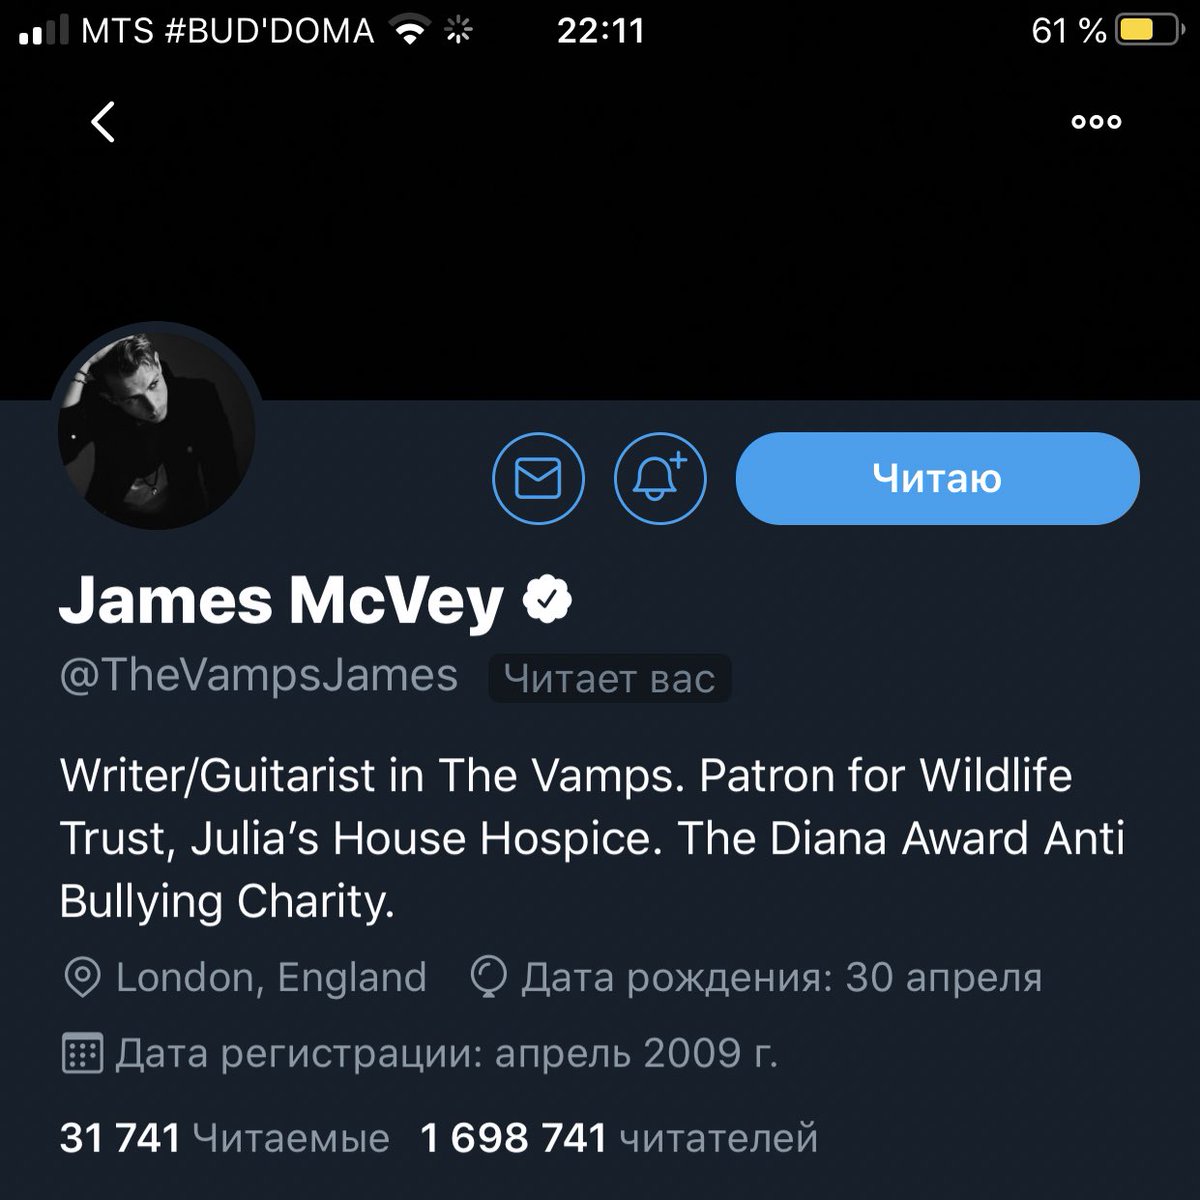 James is the first celebrity who noticed me  I love him so much